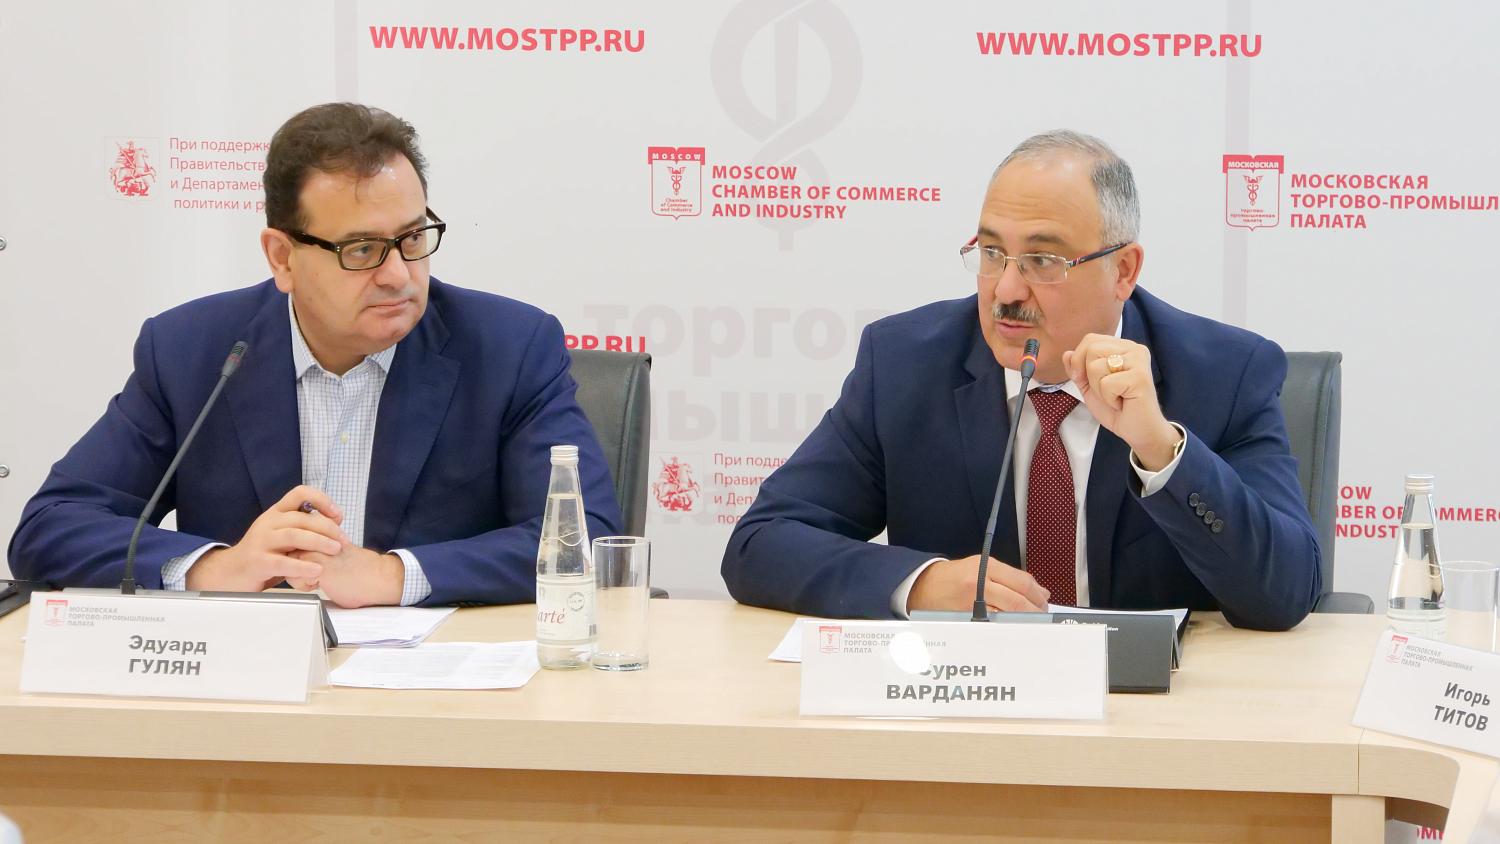 Spanish companies propose to implement social projects and localize production in Moscow